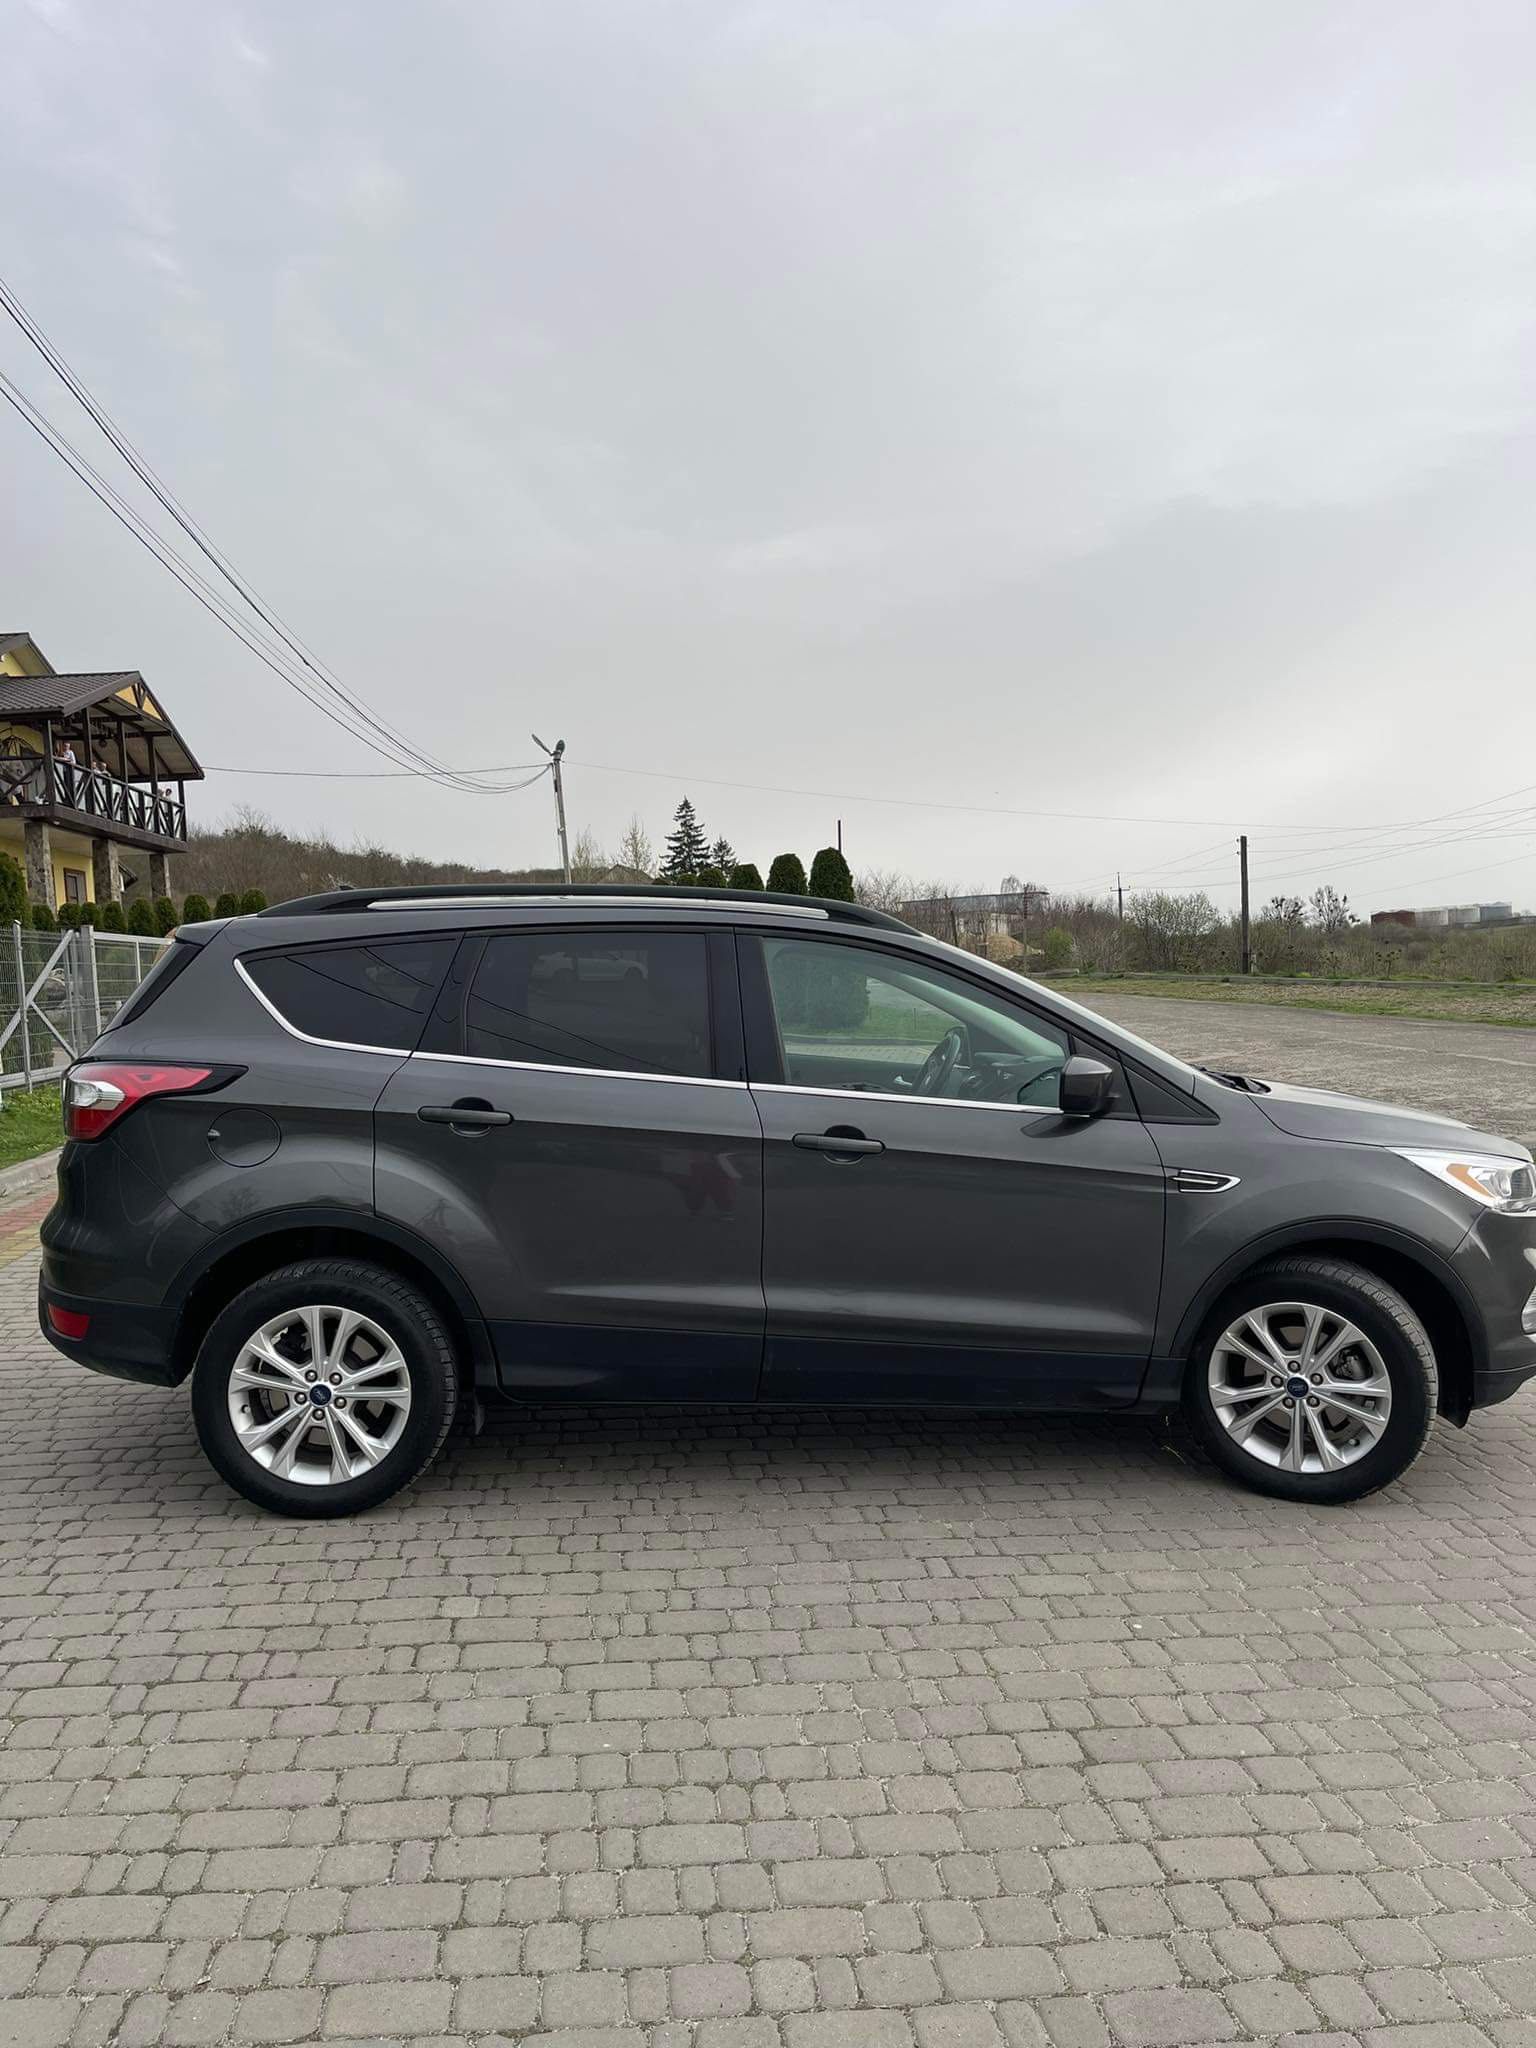 Ford Escape 2018 SEL - 1,5 Ecoboost